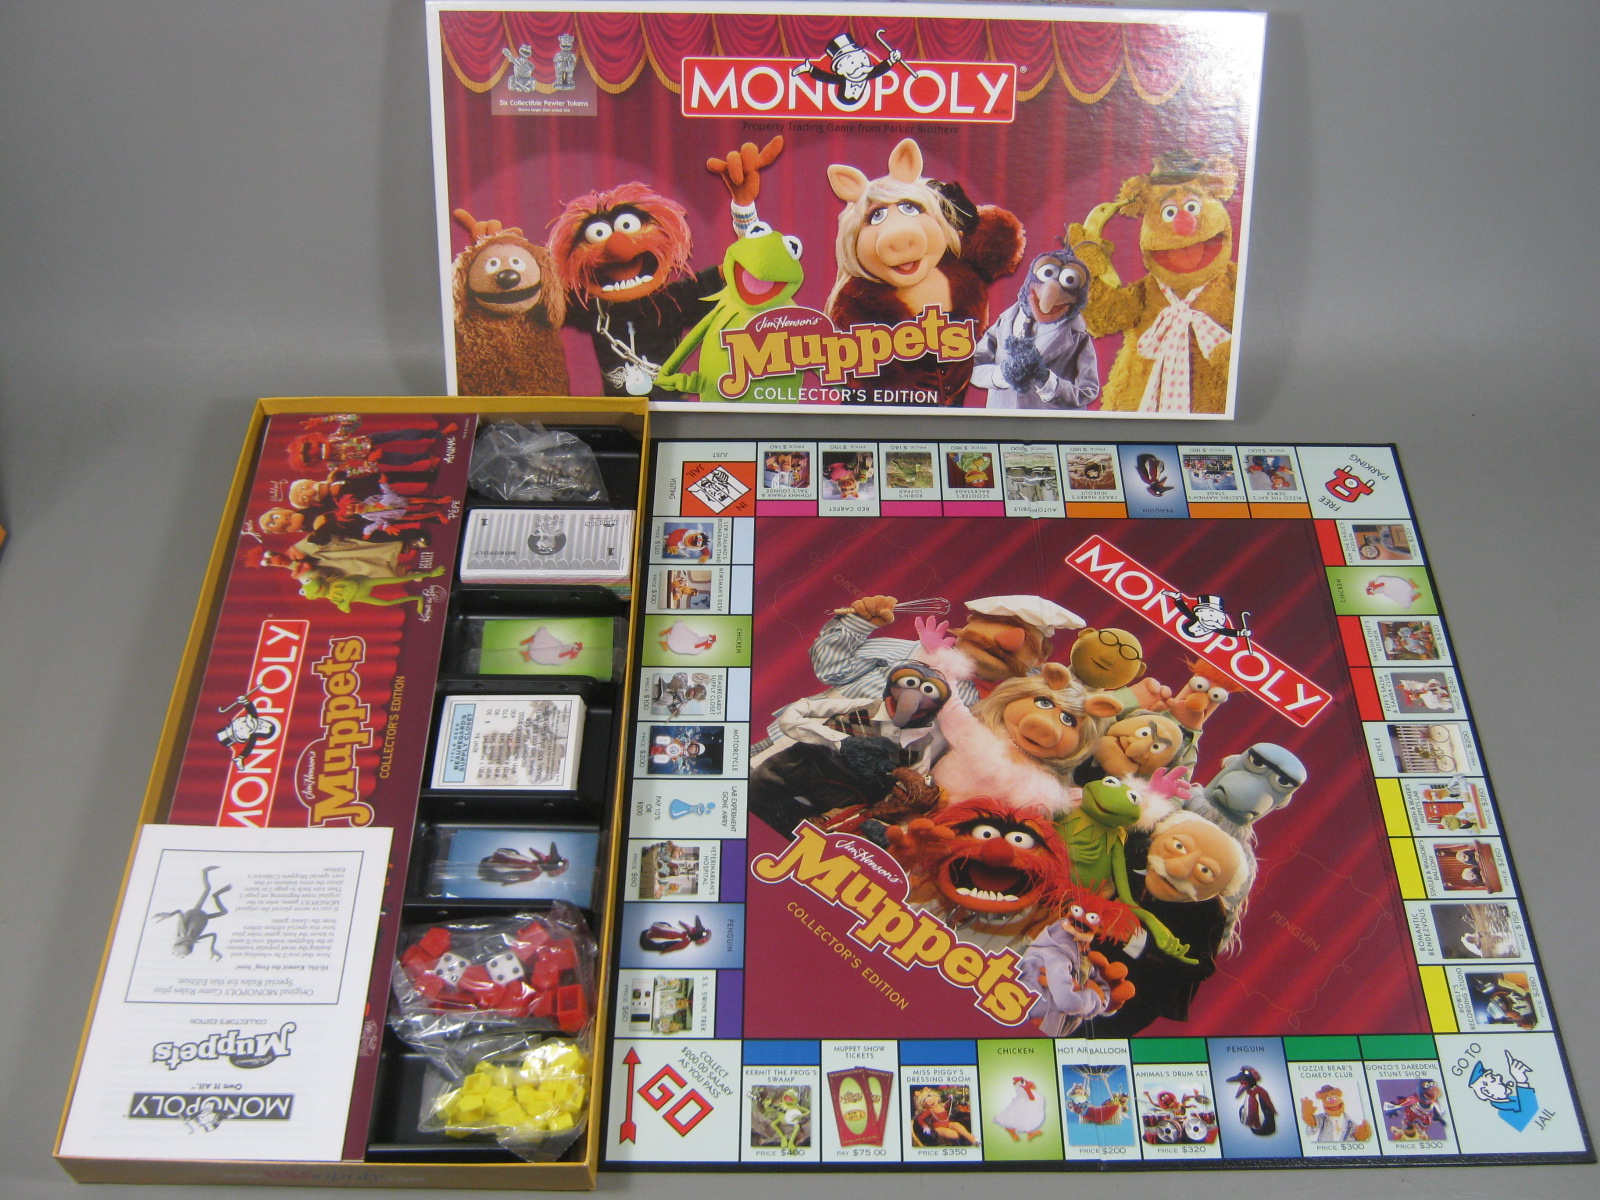 2 Monopoly Games Mickey Mouse 75th Anniversary & Muppets Collectors Editions NR! 5